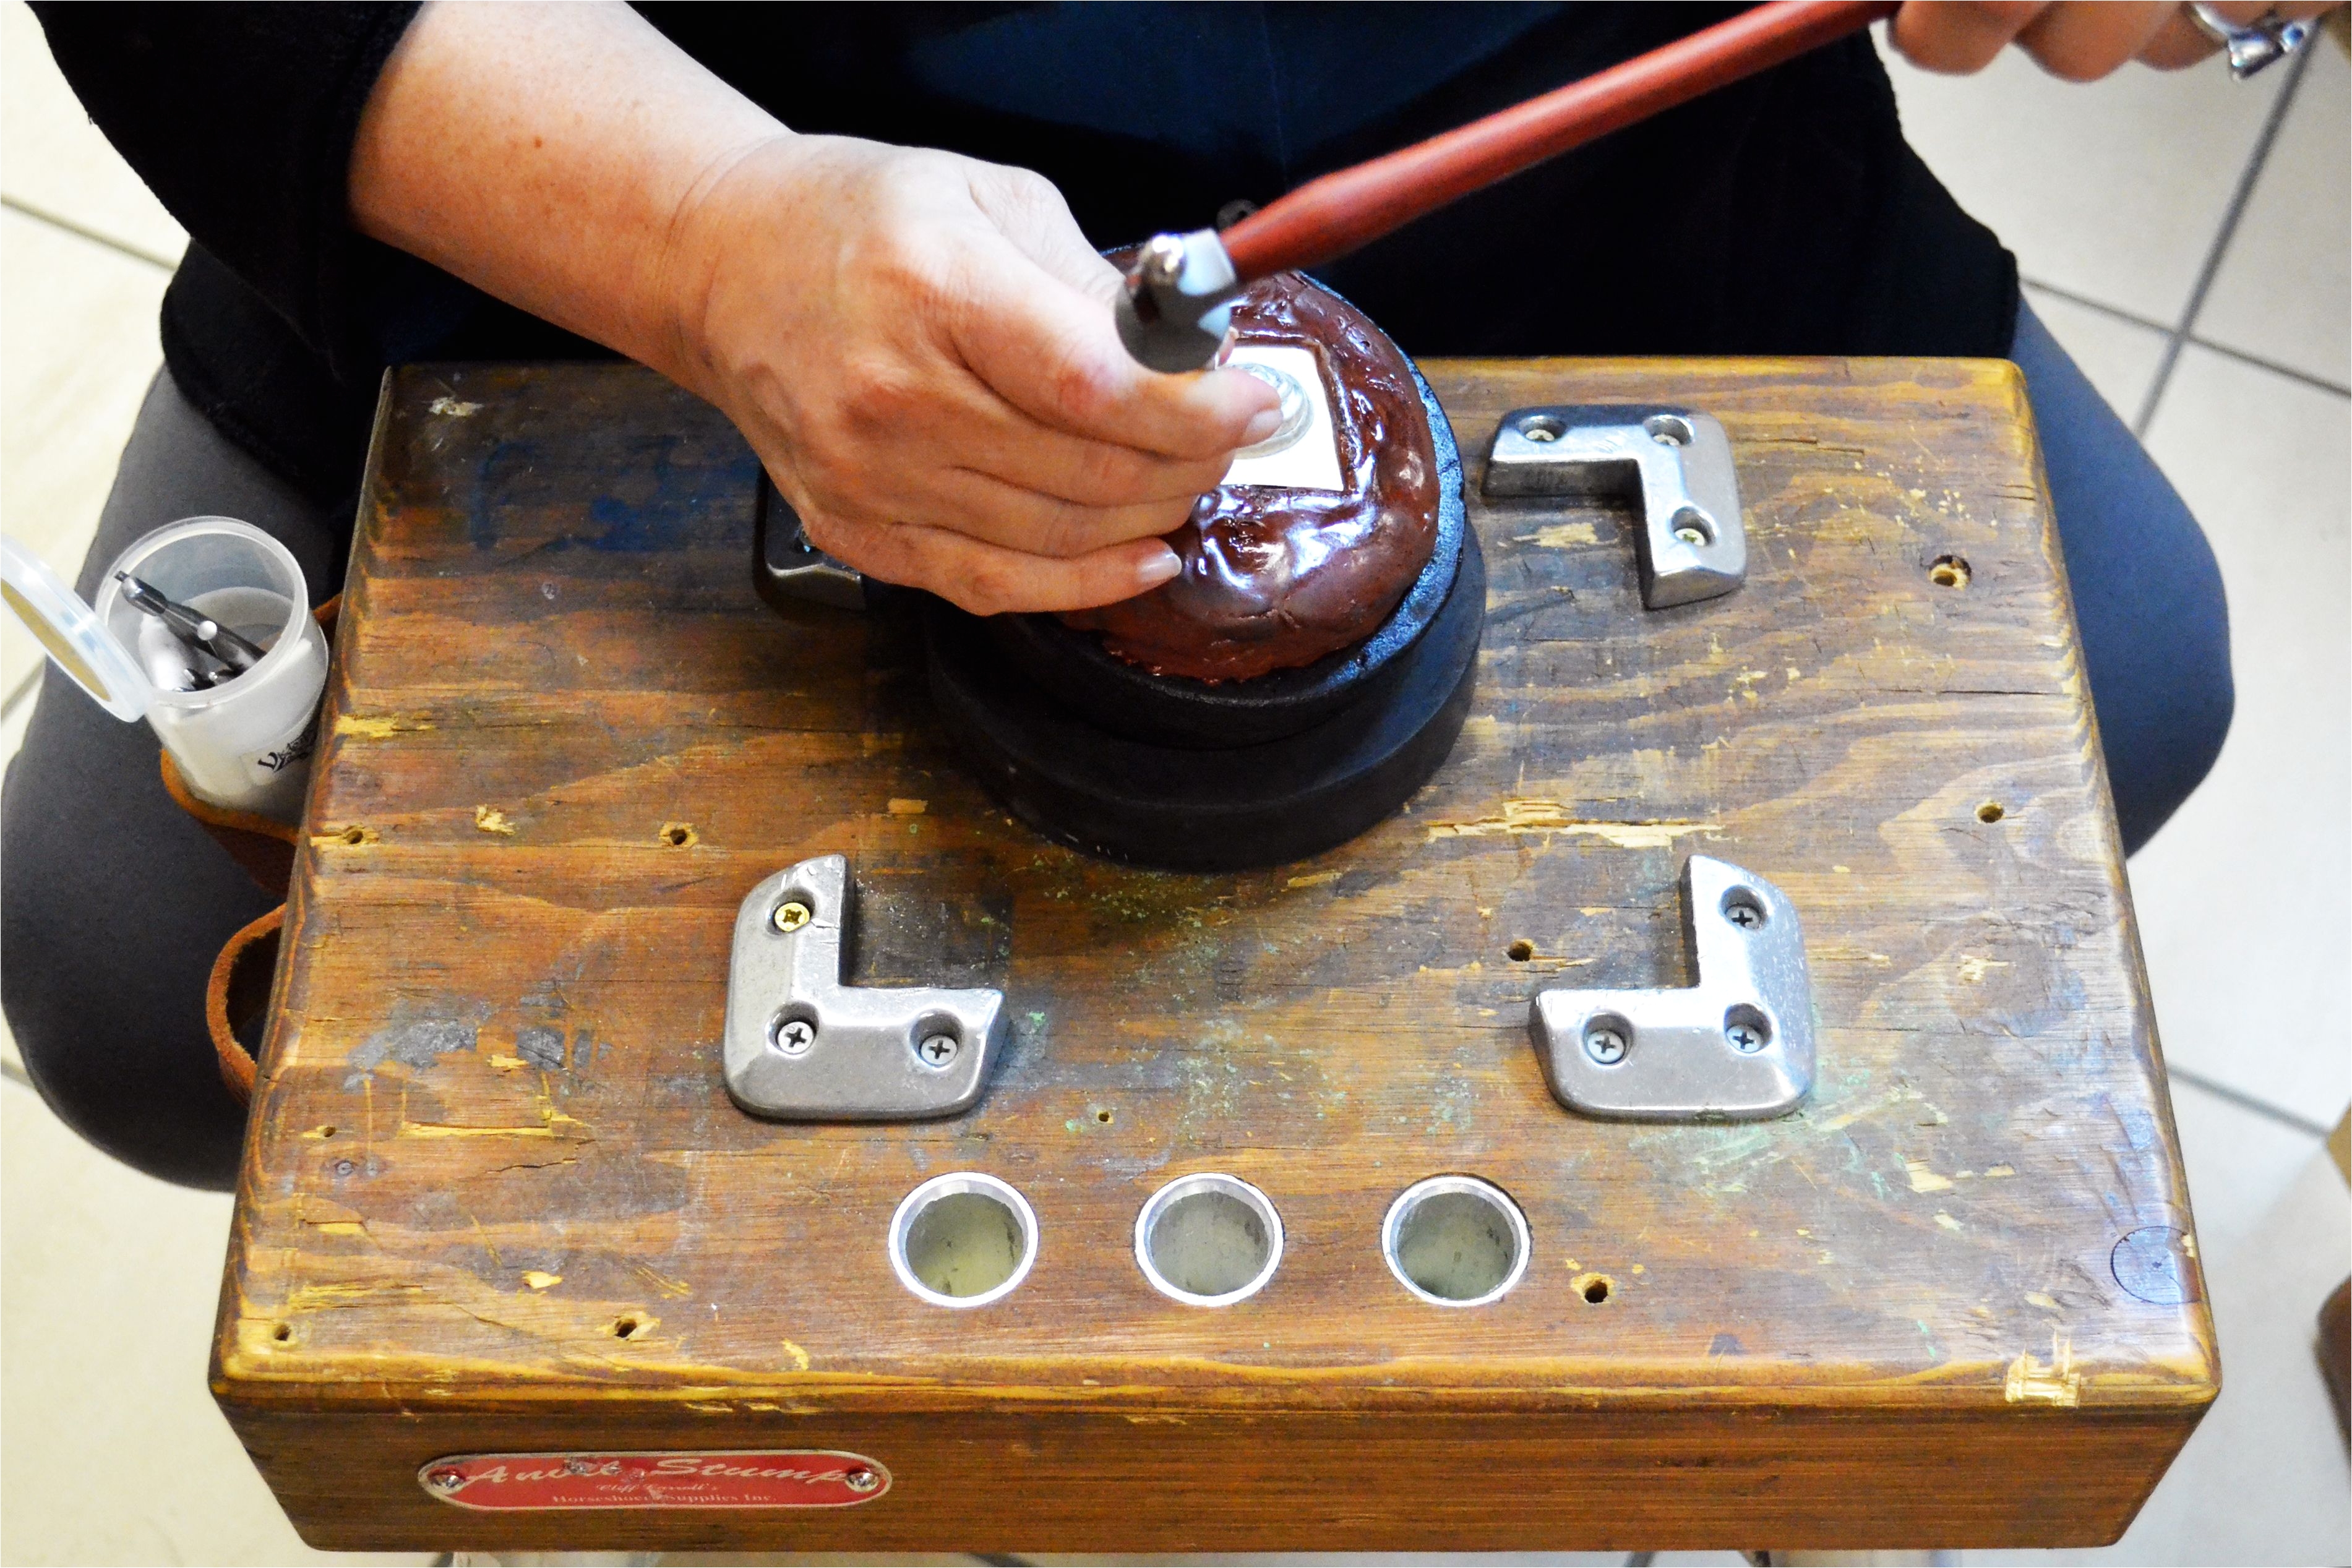 repousse jewelry making in action on the jewelers bench